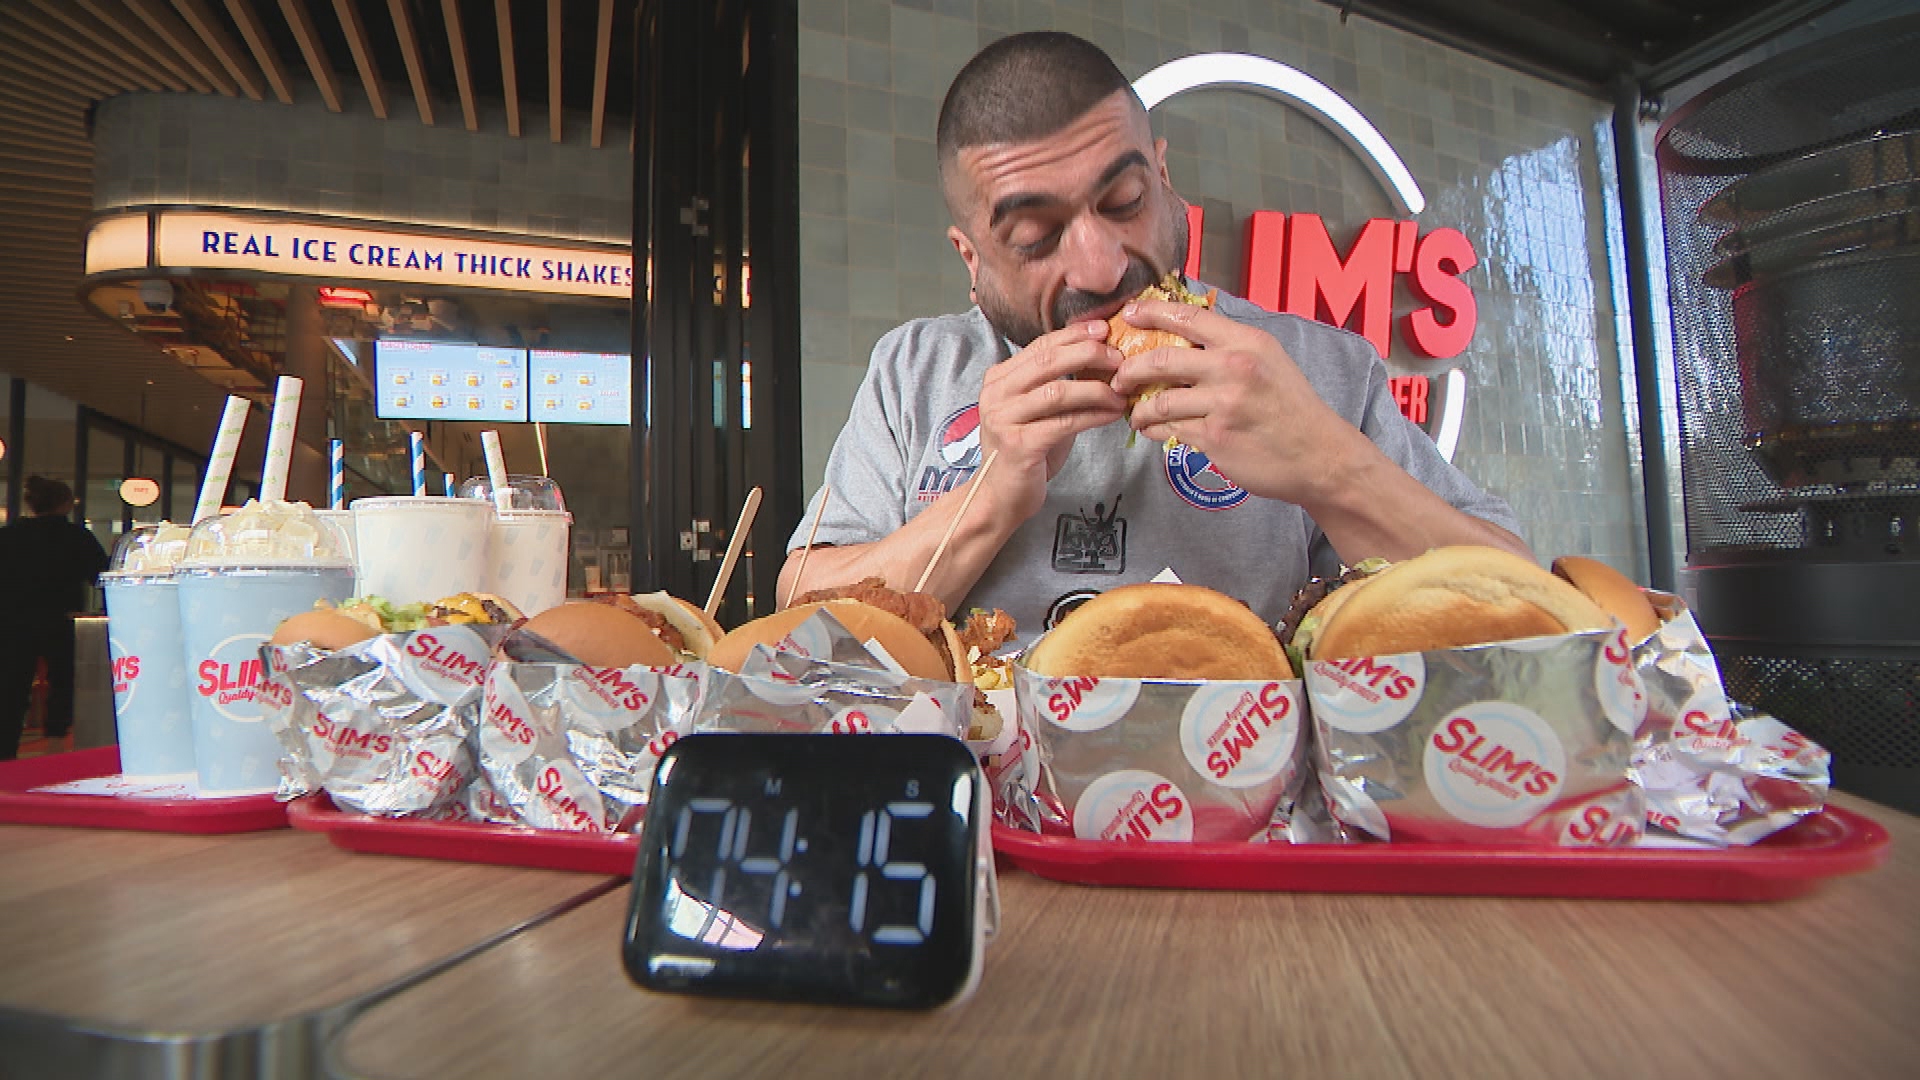 Professional eater James Webb trains for Hot dog competition in Coney Island by eating burgers.